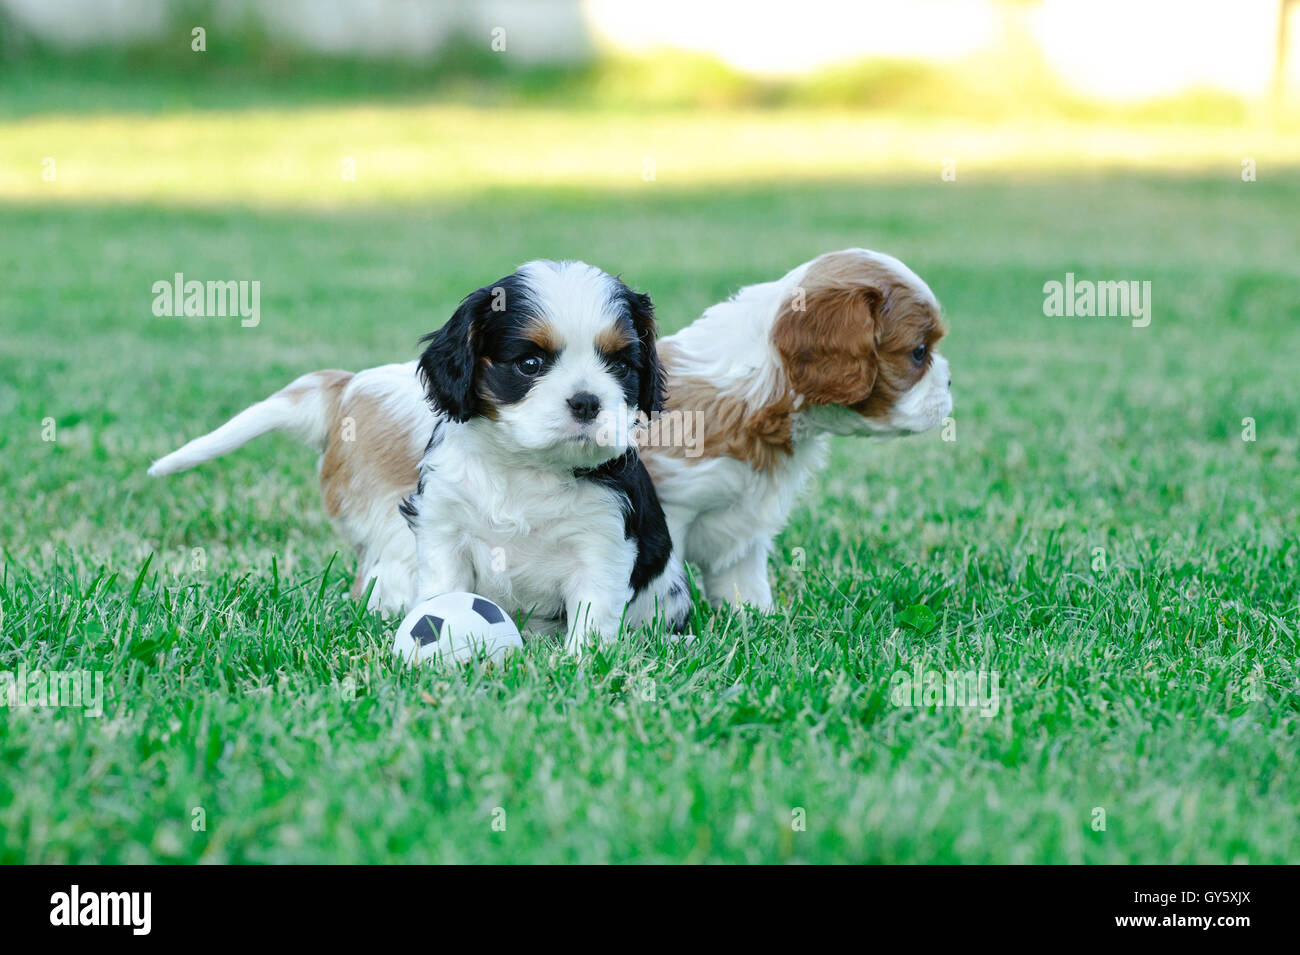 Cavalier king charles spaniel puppies in garden playing football, soccer Stock Photo